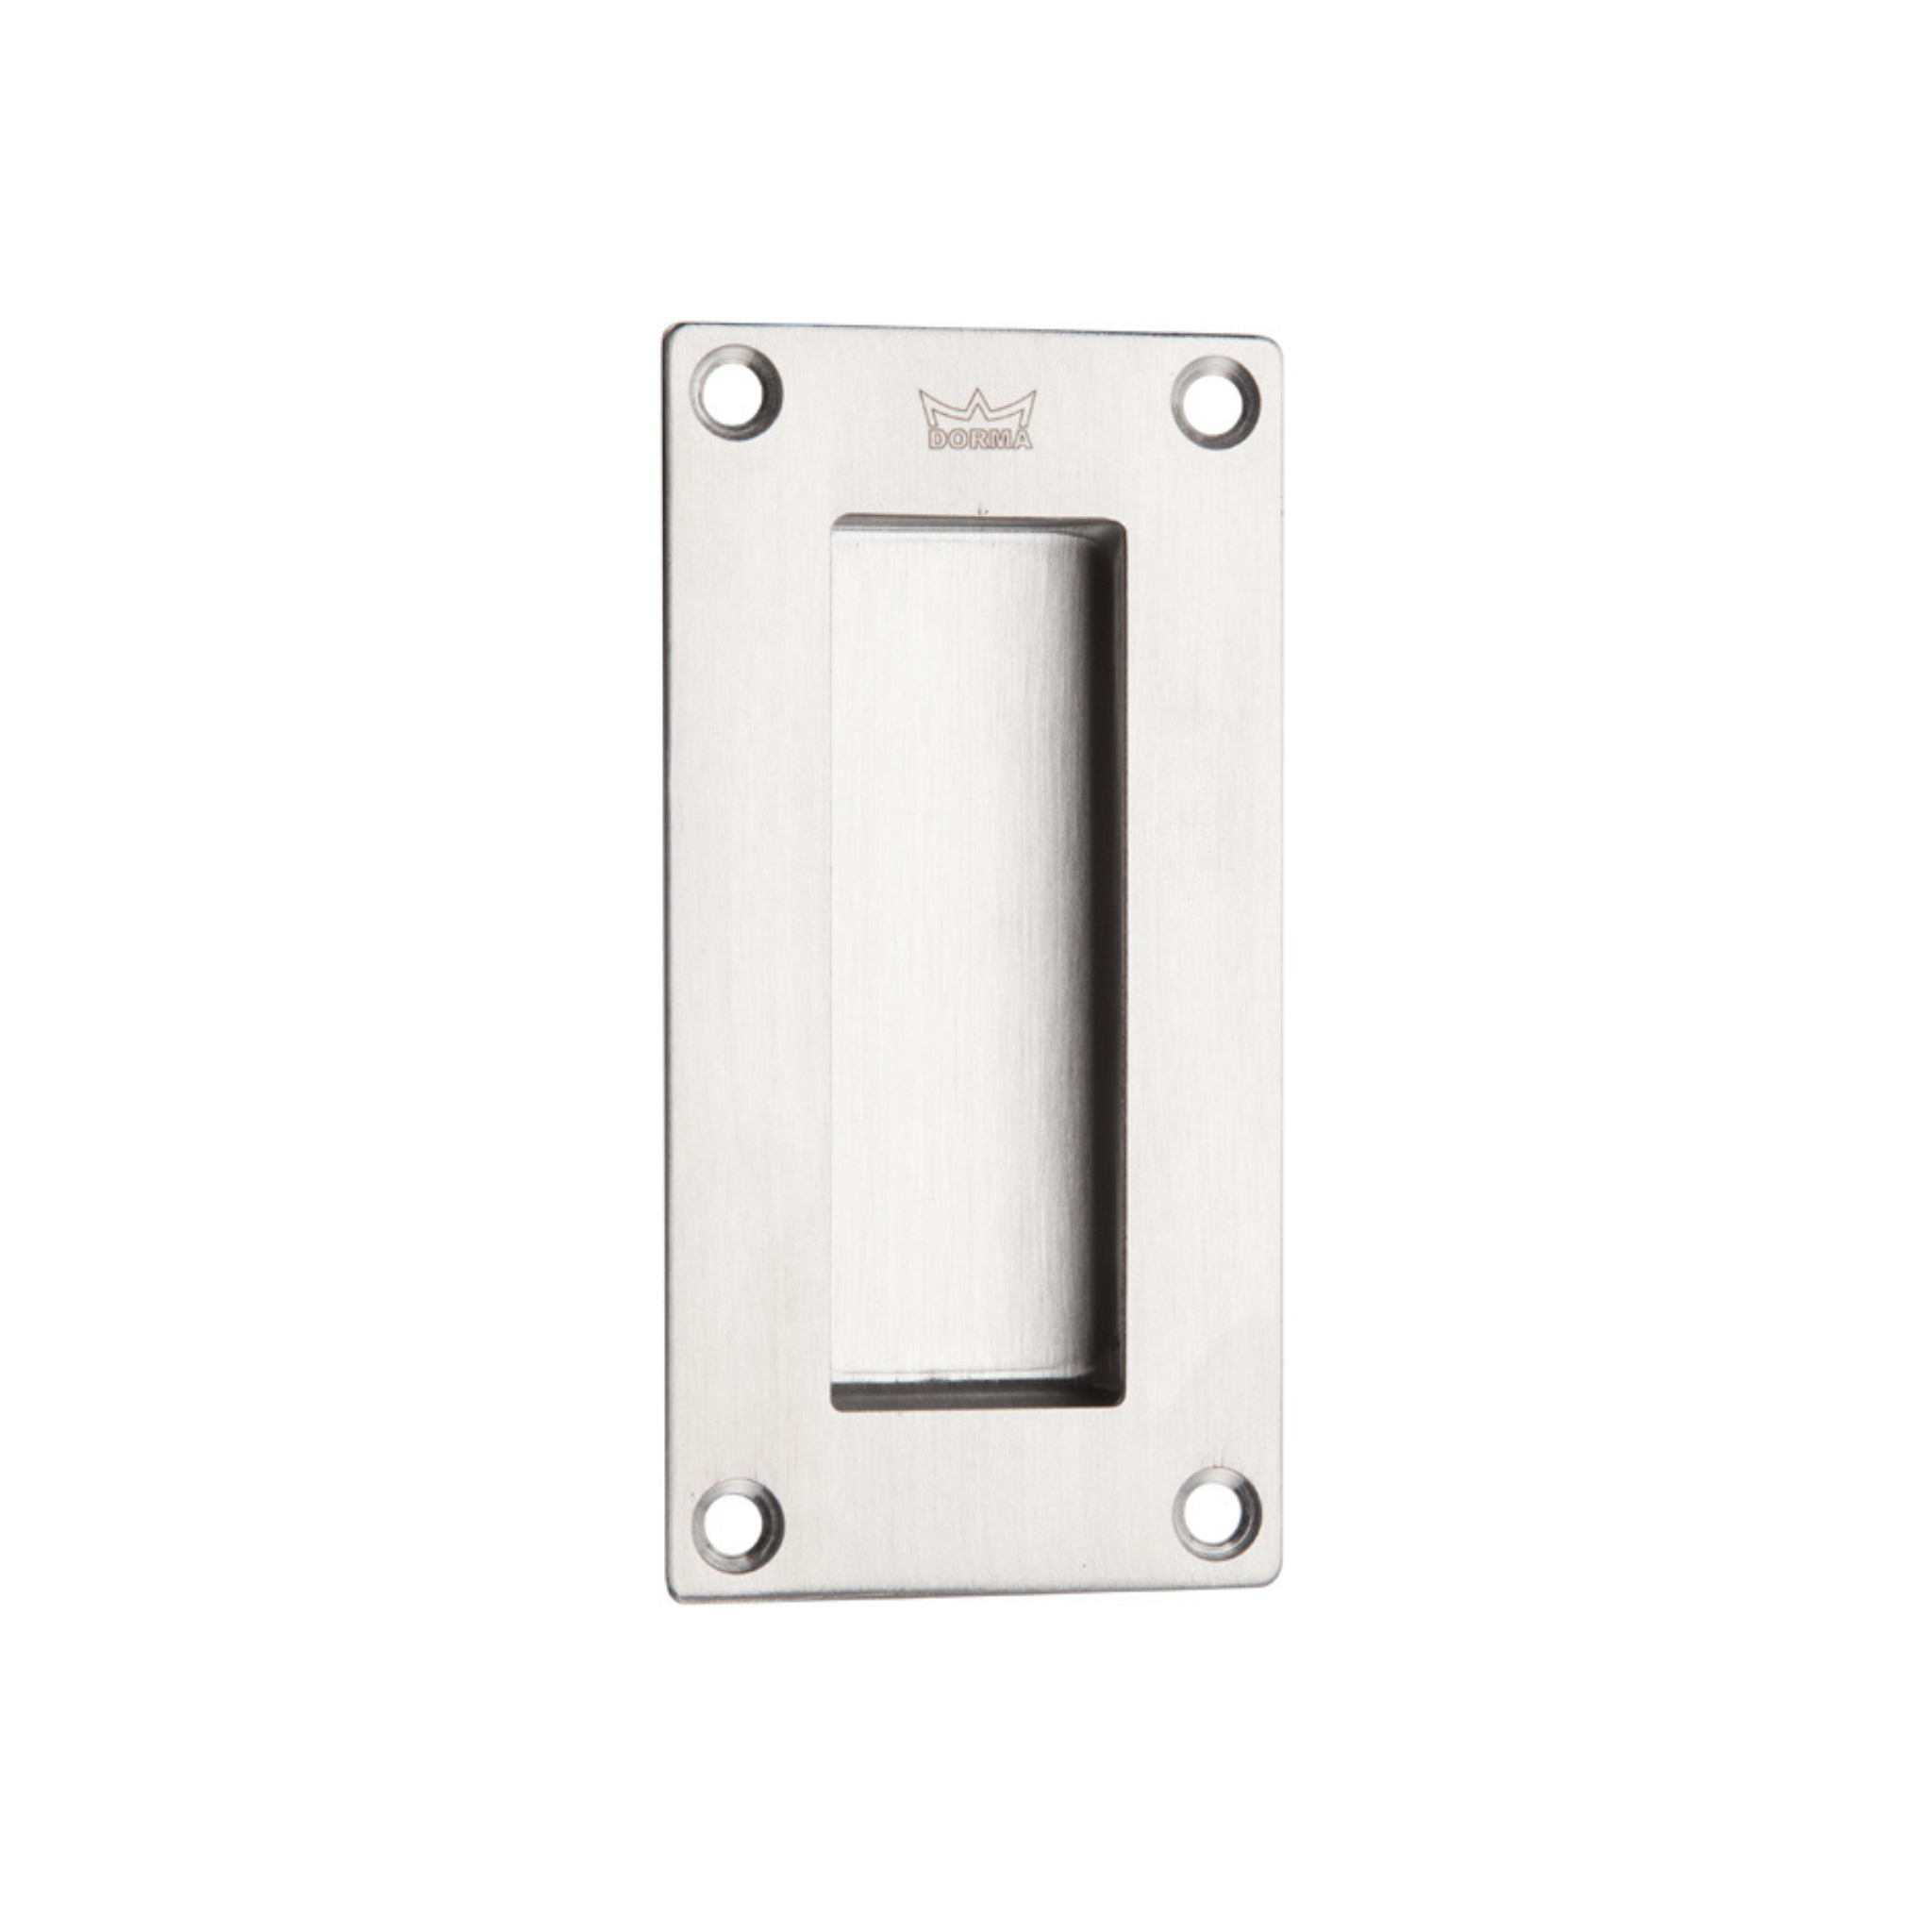 DFP-SS-026, Pull Handle, Recessed, Flush, Rectangular, 102mm (l) x 50mm (w), Stainless Steel, DORMAKABA